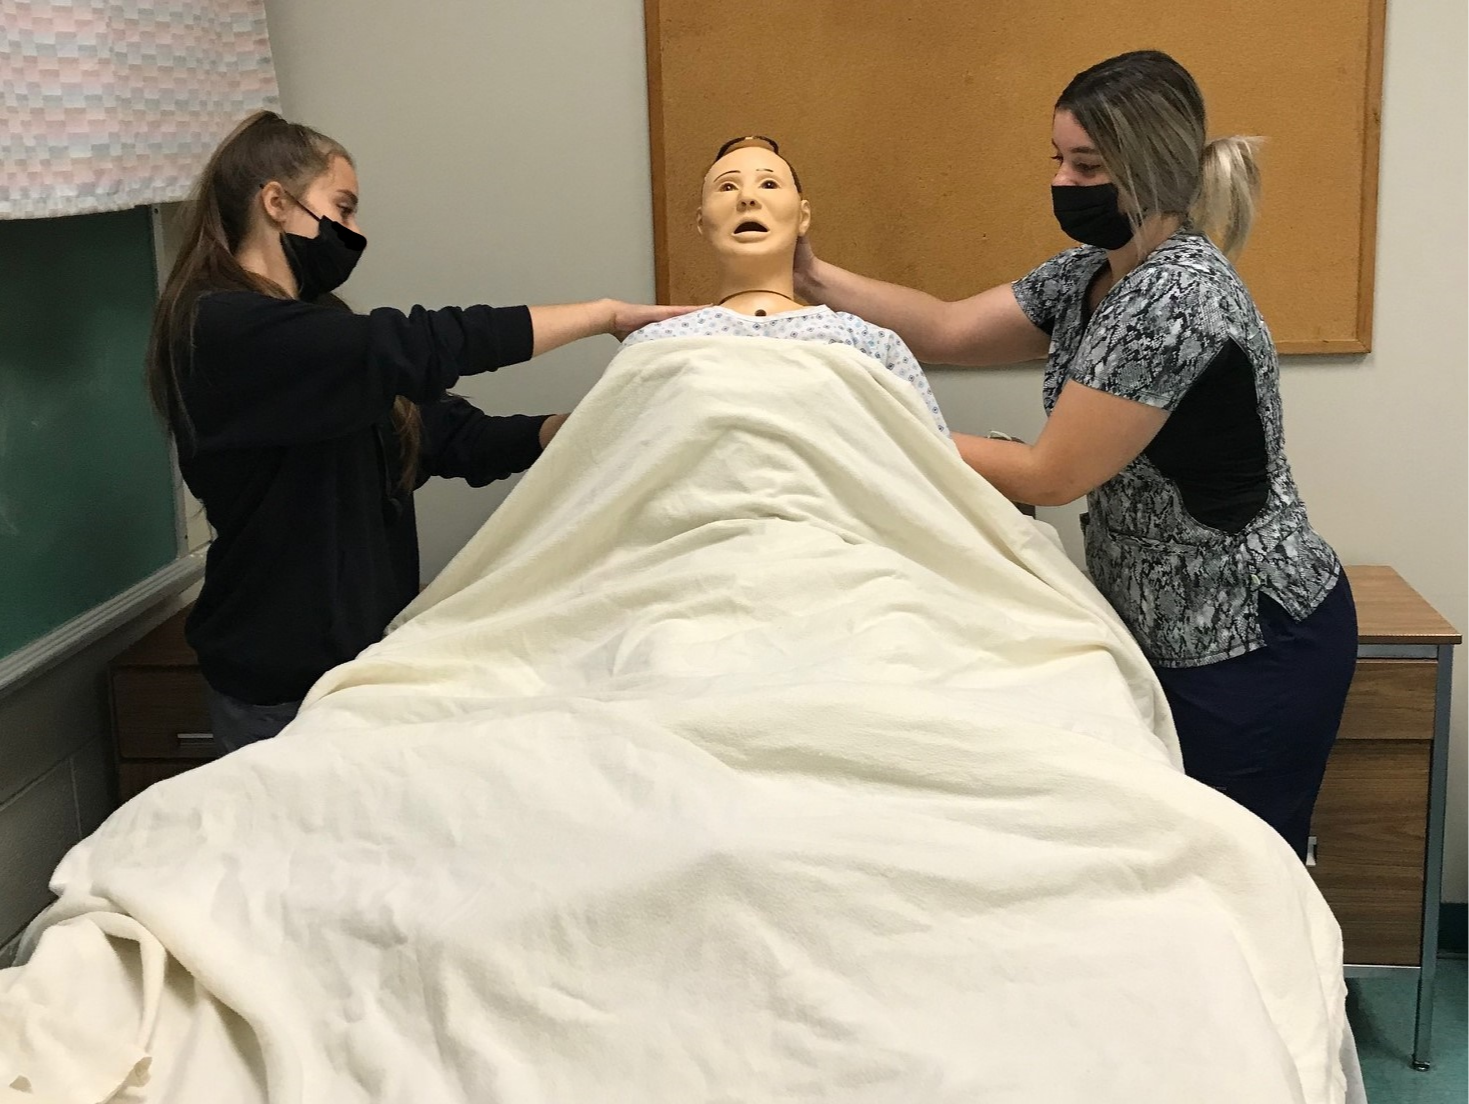 Health Science Careers students practice with a mannequin